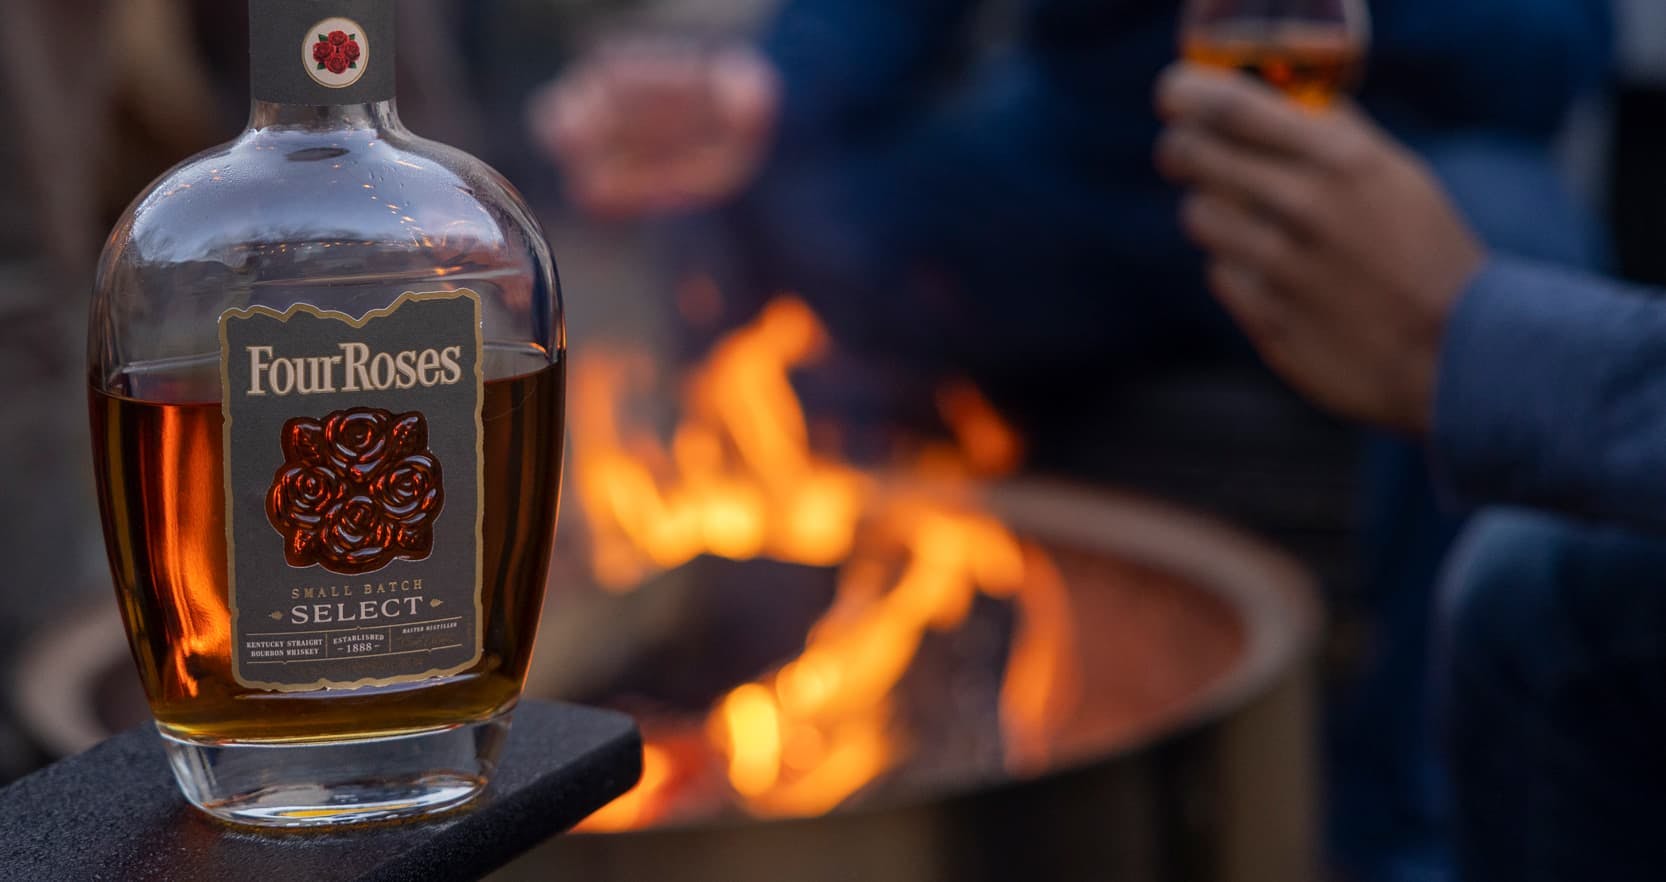 Friends enyoing Four Roses Small Batch Select over a firepit